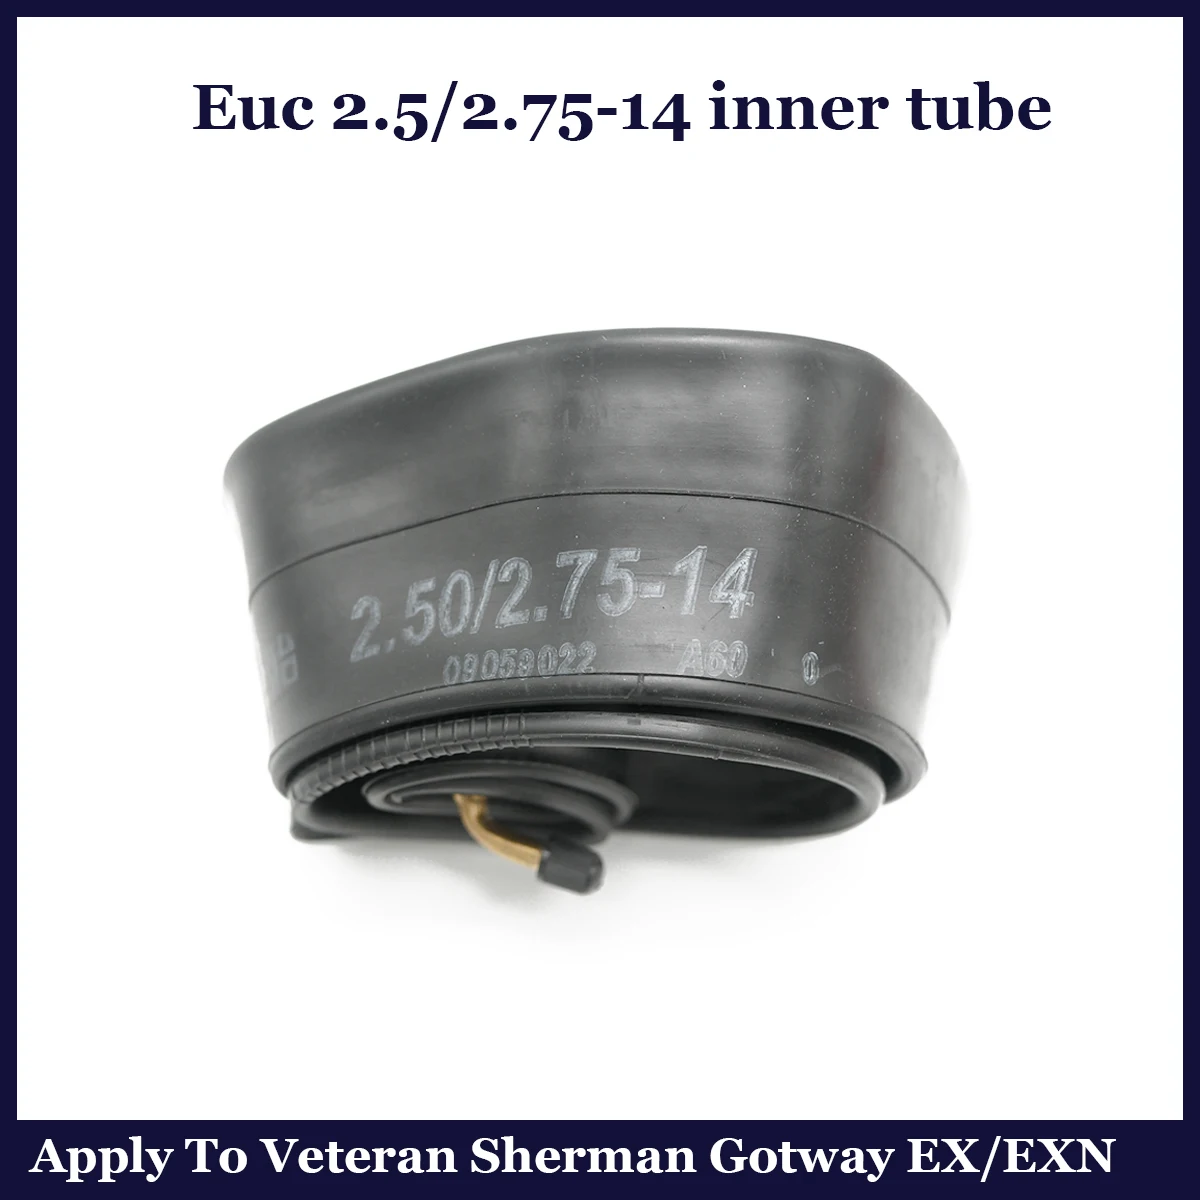 

Electric Unicycle Veteran Sherman Inner Tube 2.5/2.75-14 Apply for Monociclo Eletrico Begode Ex Exn